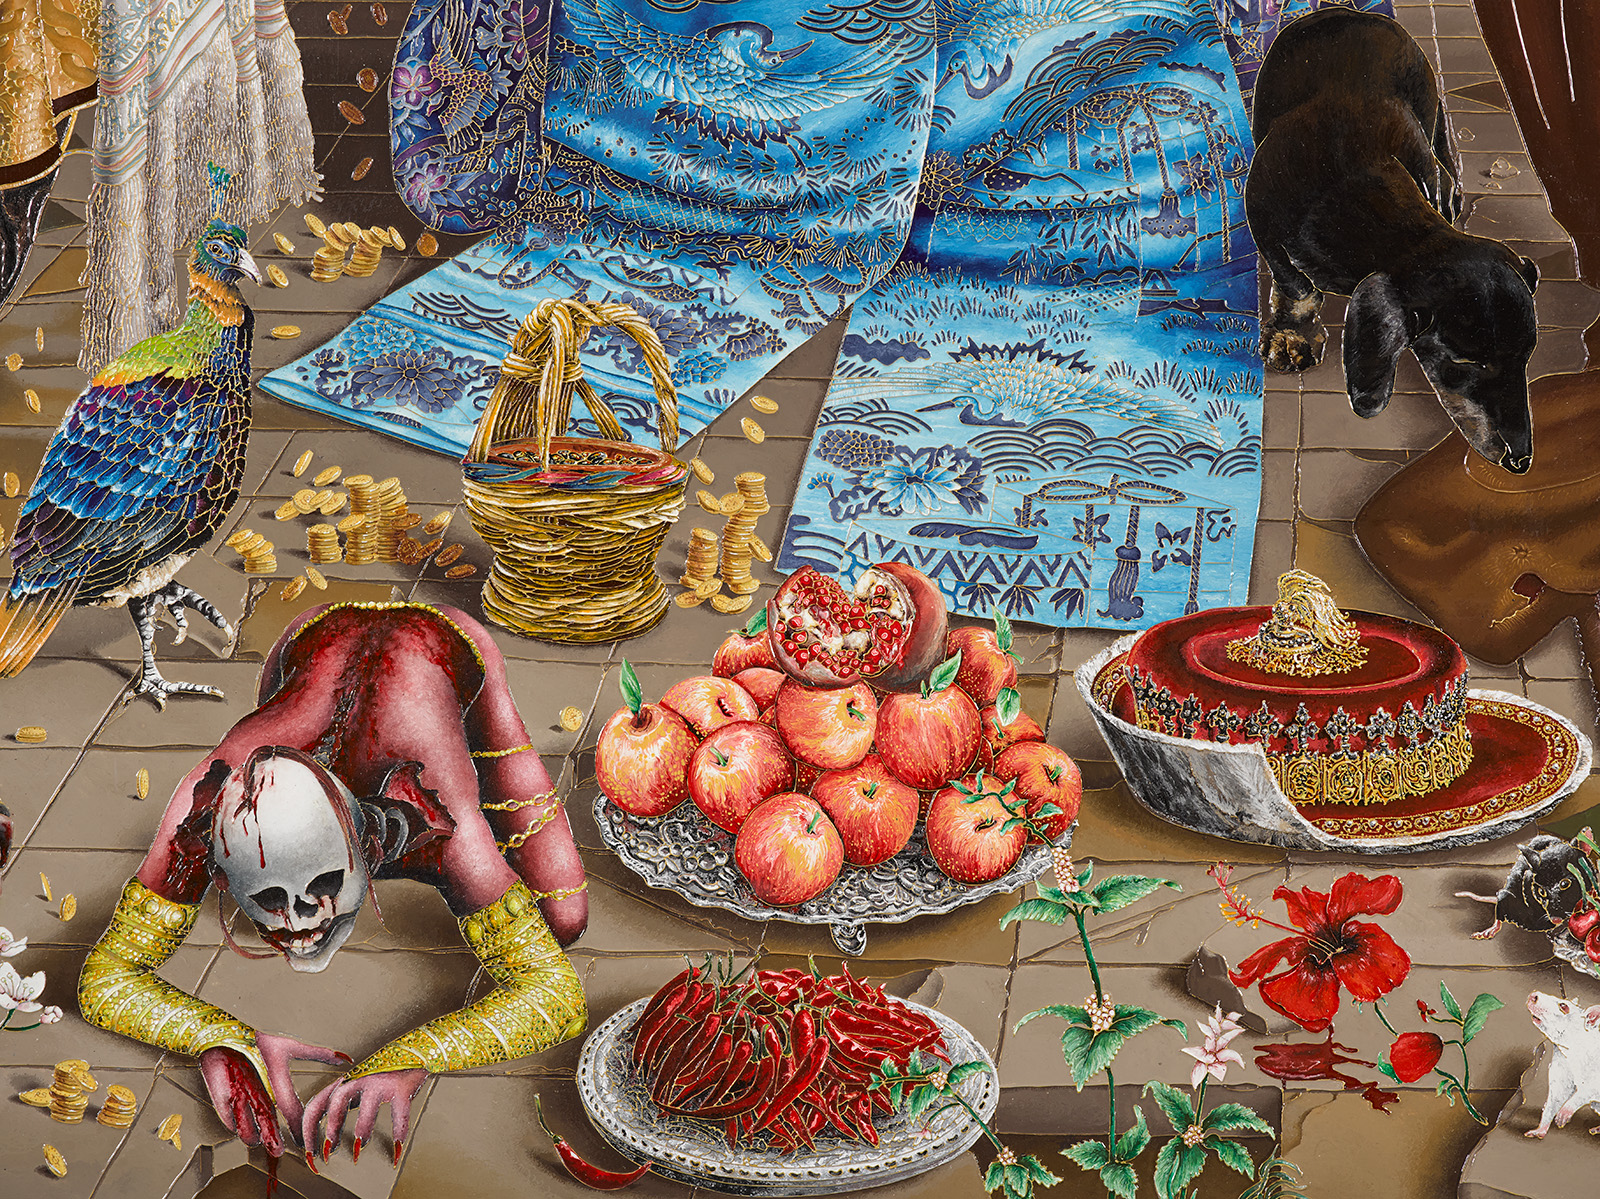 Ornate objects strewn across floor with a skeleton-headed figure lying on the ground